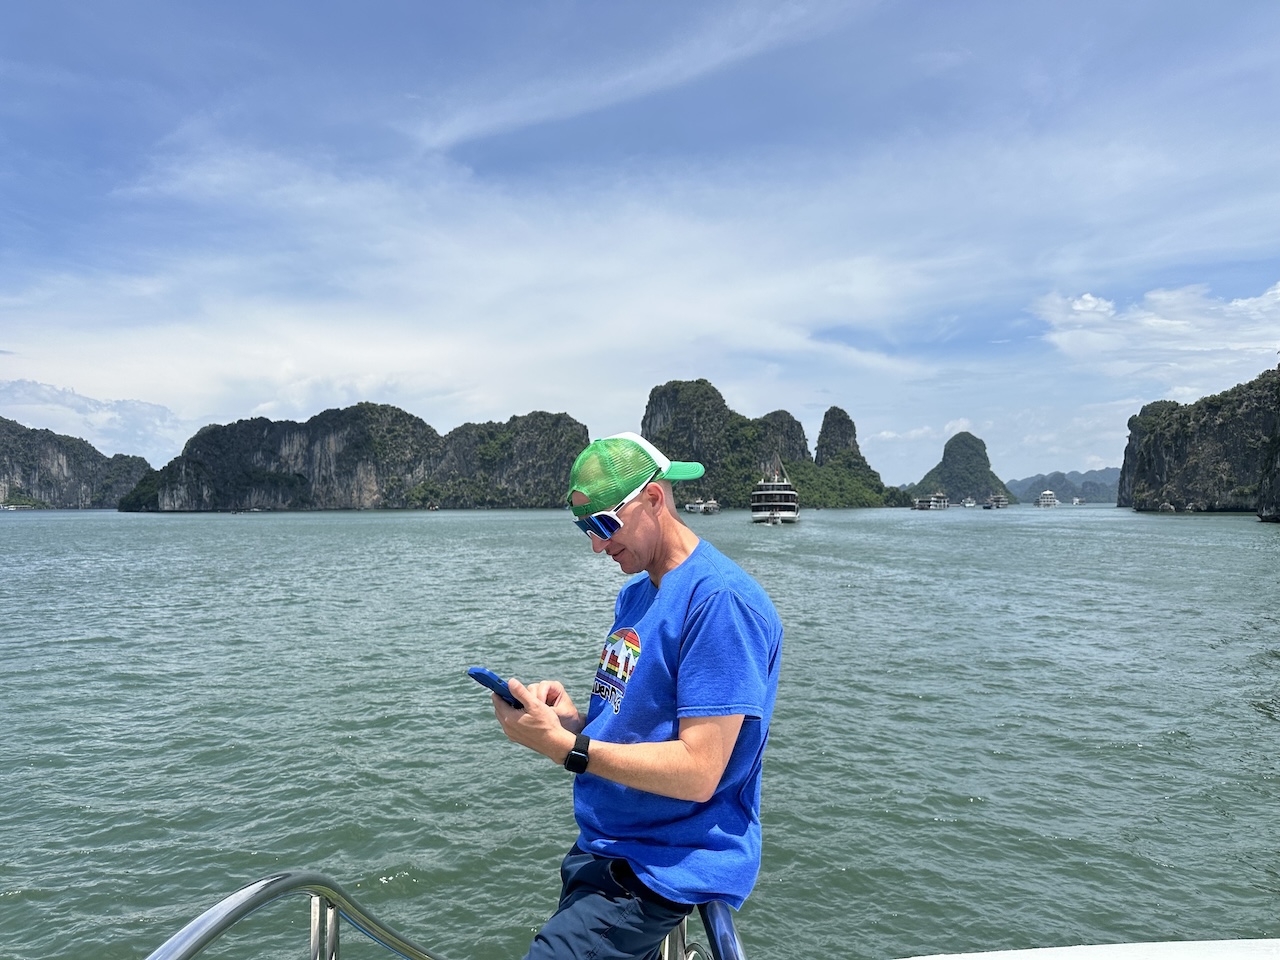 My eSIM card from Airalo allowed me to use my phone throughout my trip, including Ha Long Bay.